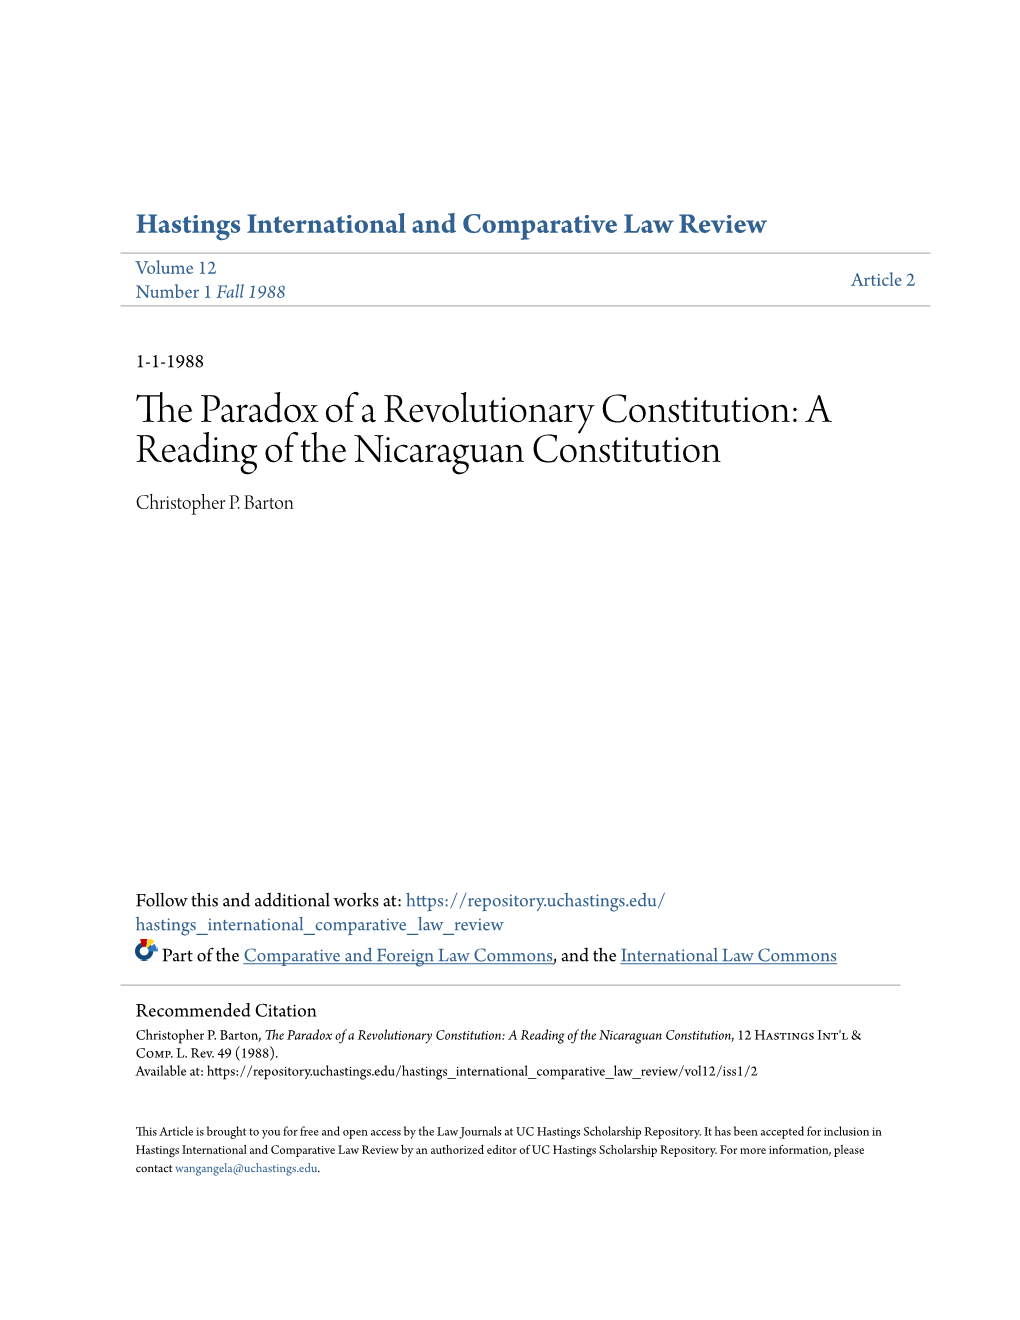 A Reading of the Nicaraguan Constitution Christopher P